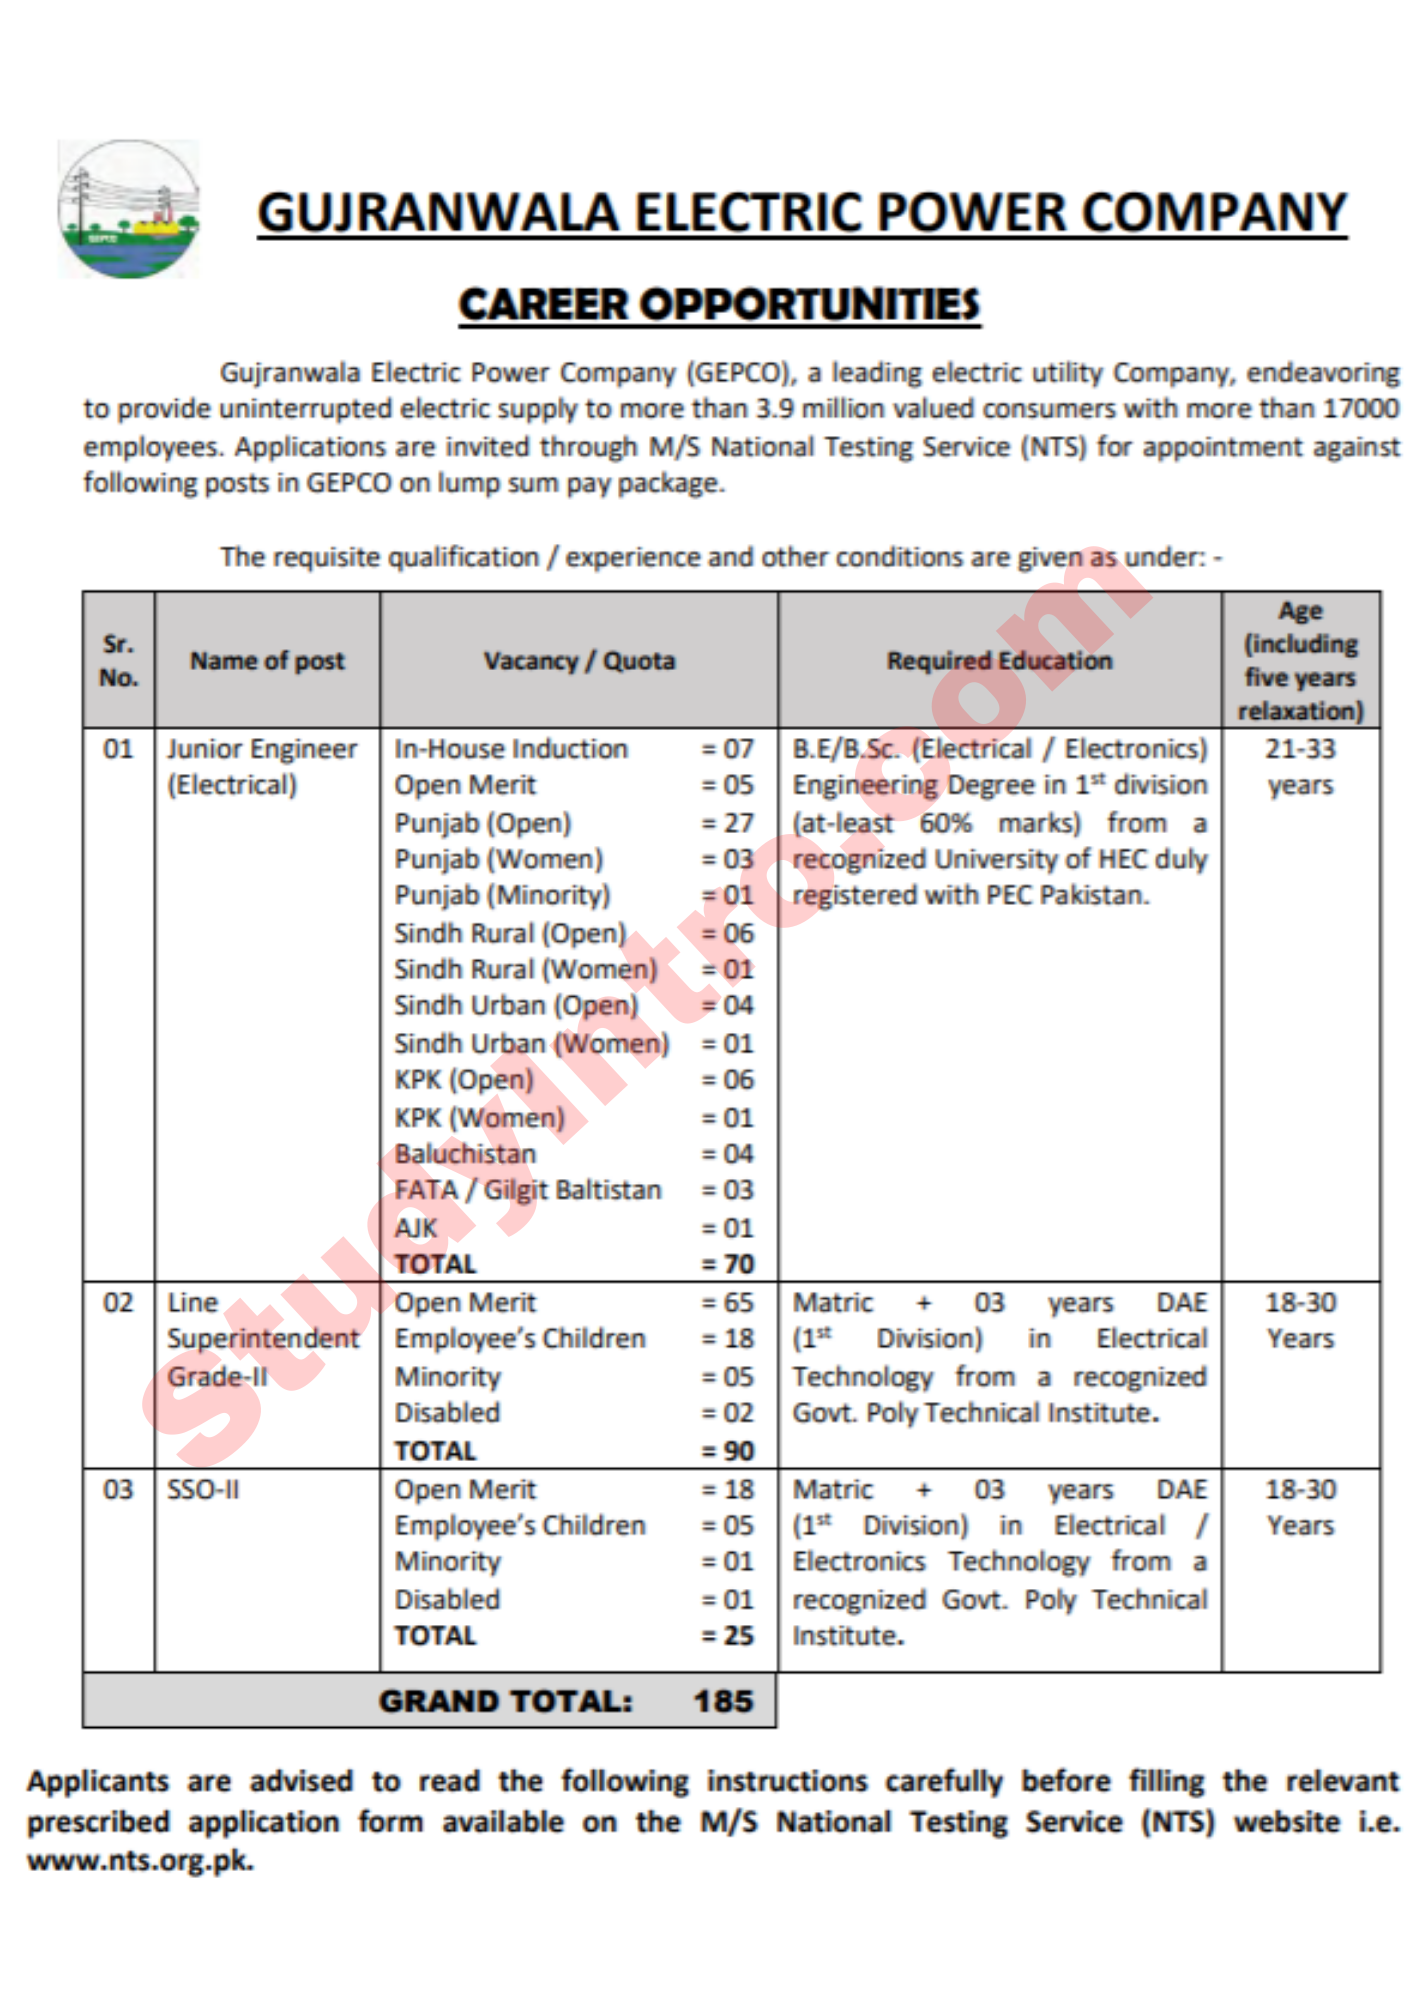 Latest GEPCO Jobs 2022 in Gujranwala